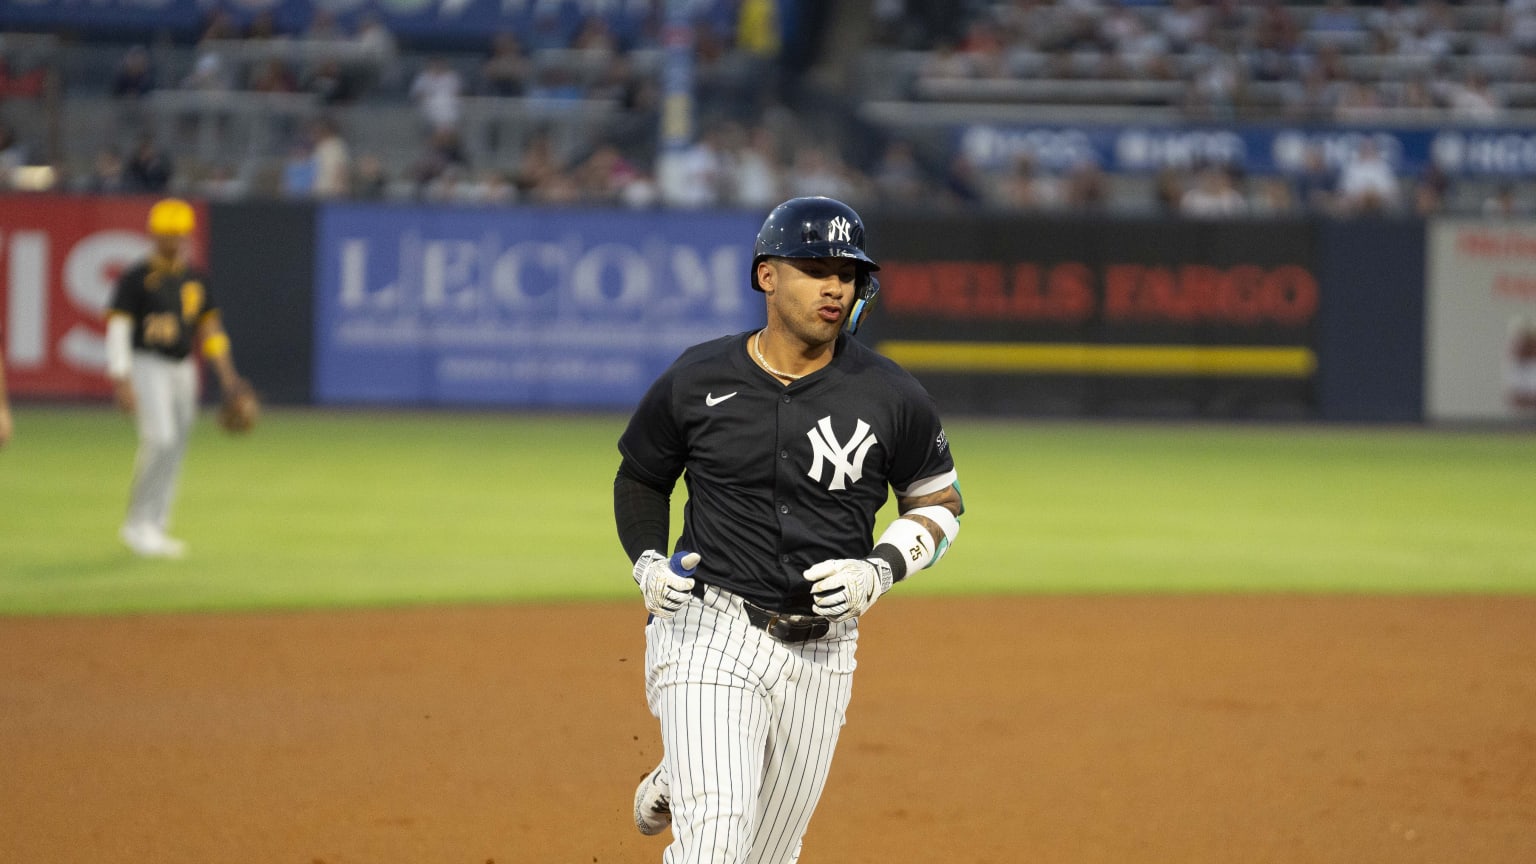 Energized by World Baseball Classic, Gleyber Torres returns to